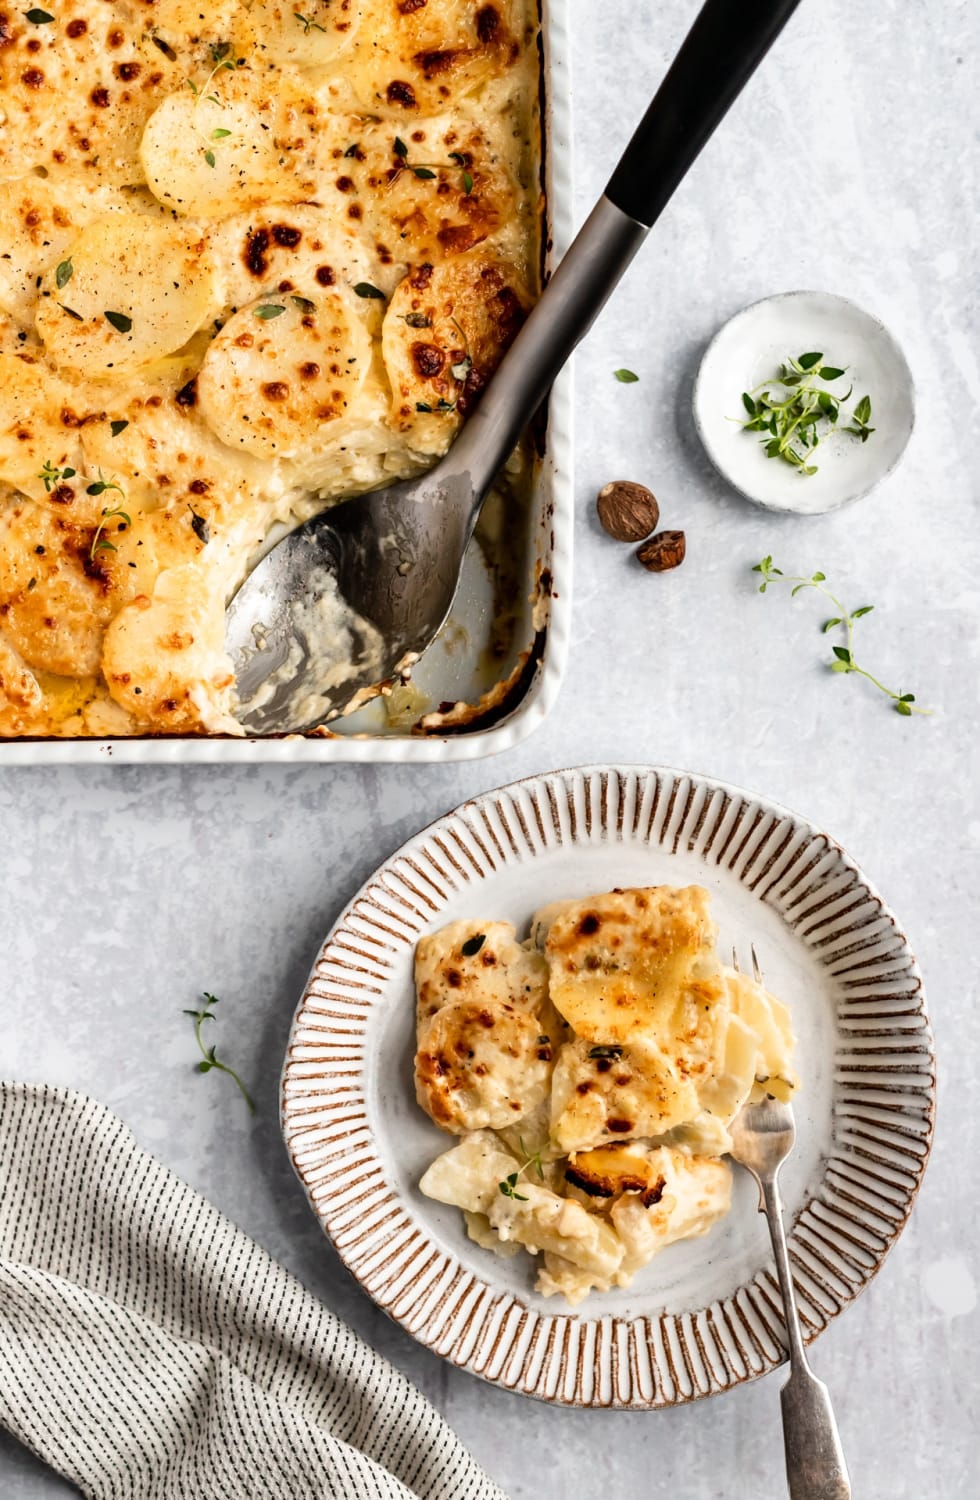 Cheesy scalloped potatoes are an easy yet impressive side dish!